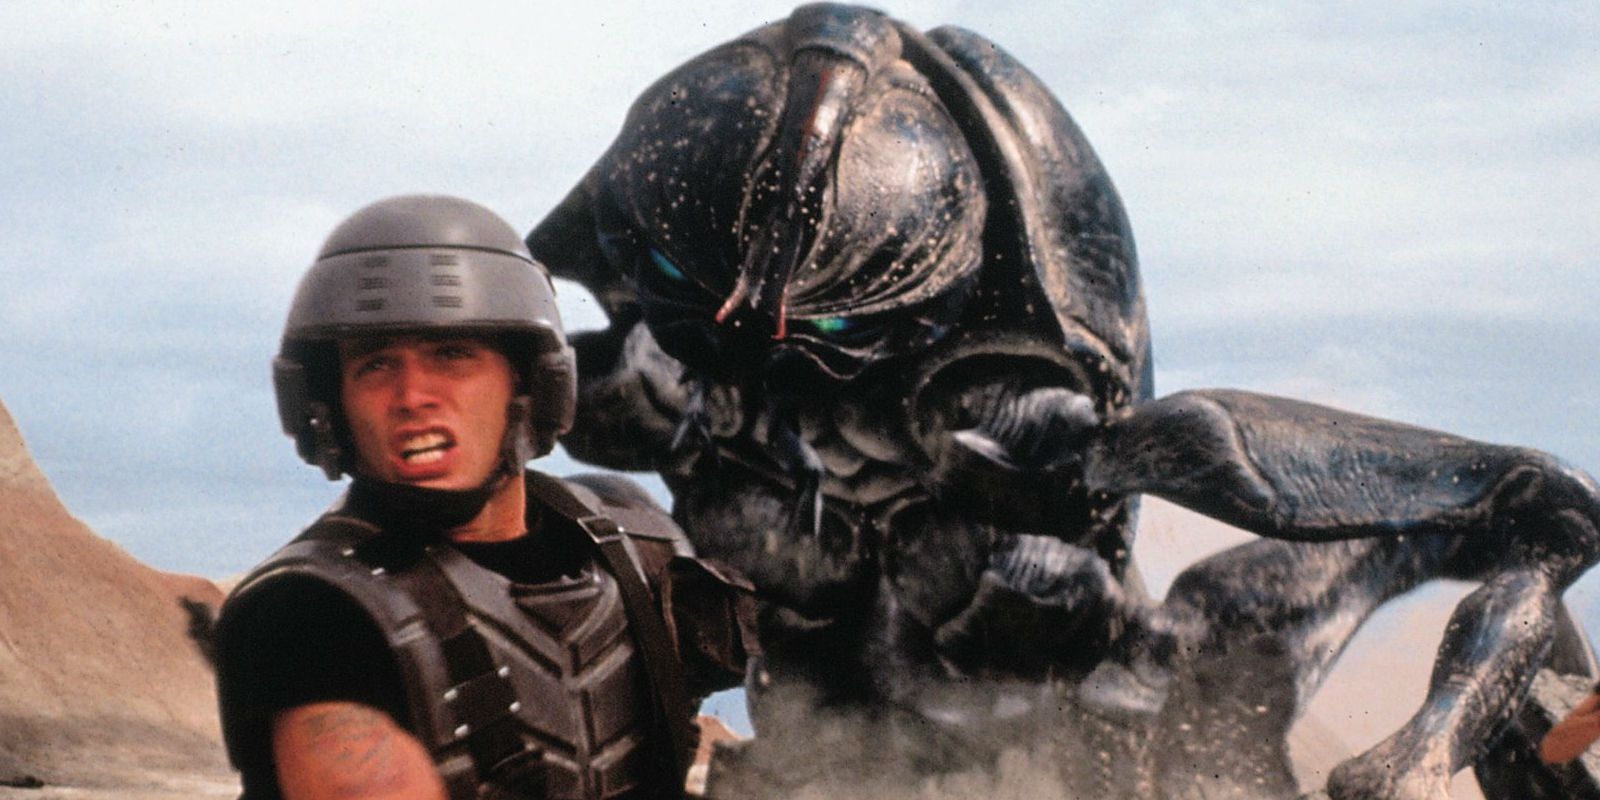 Rico running from a giant bug in Starship Troopers 